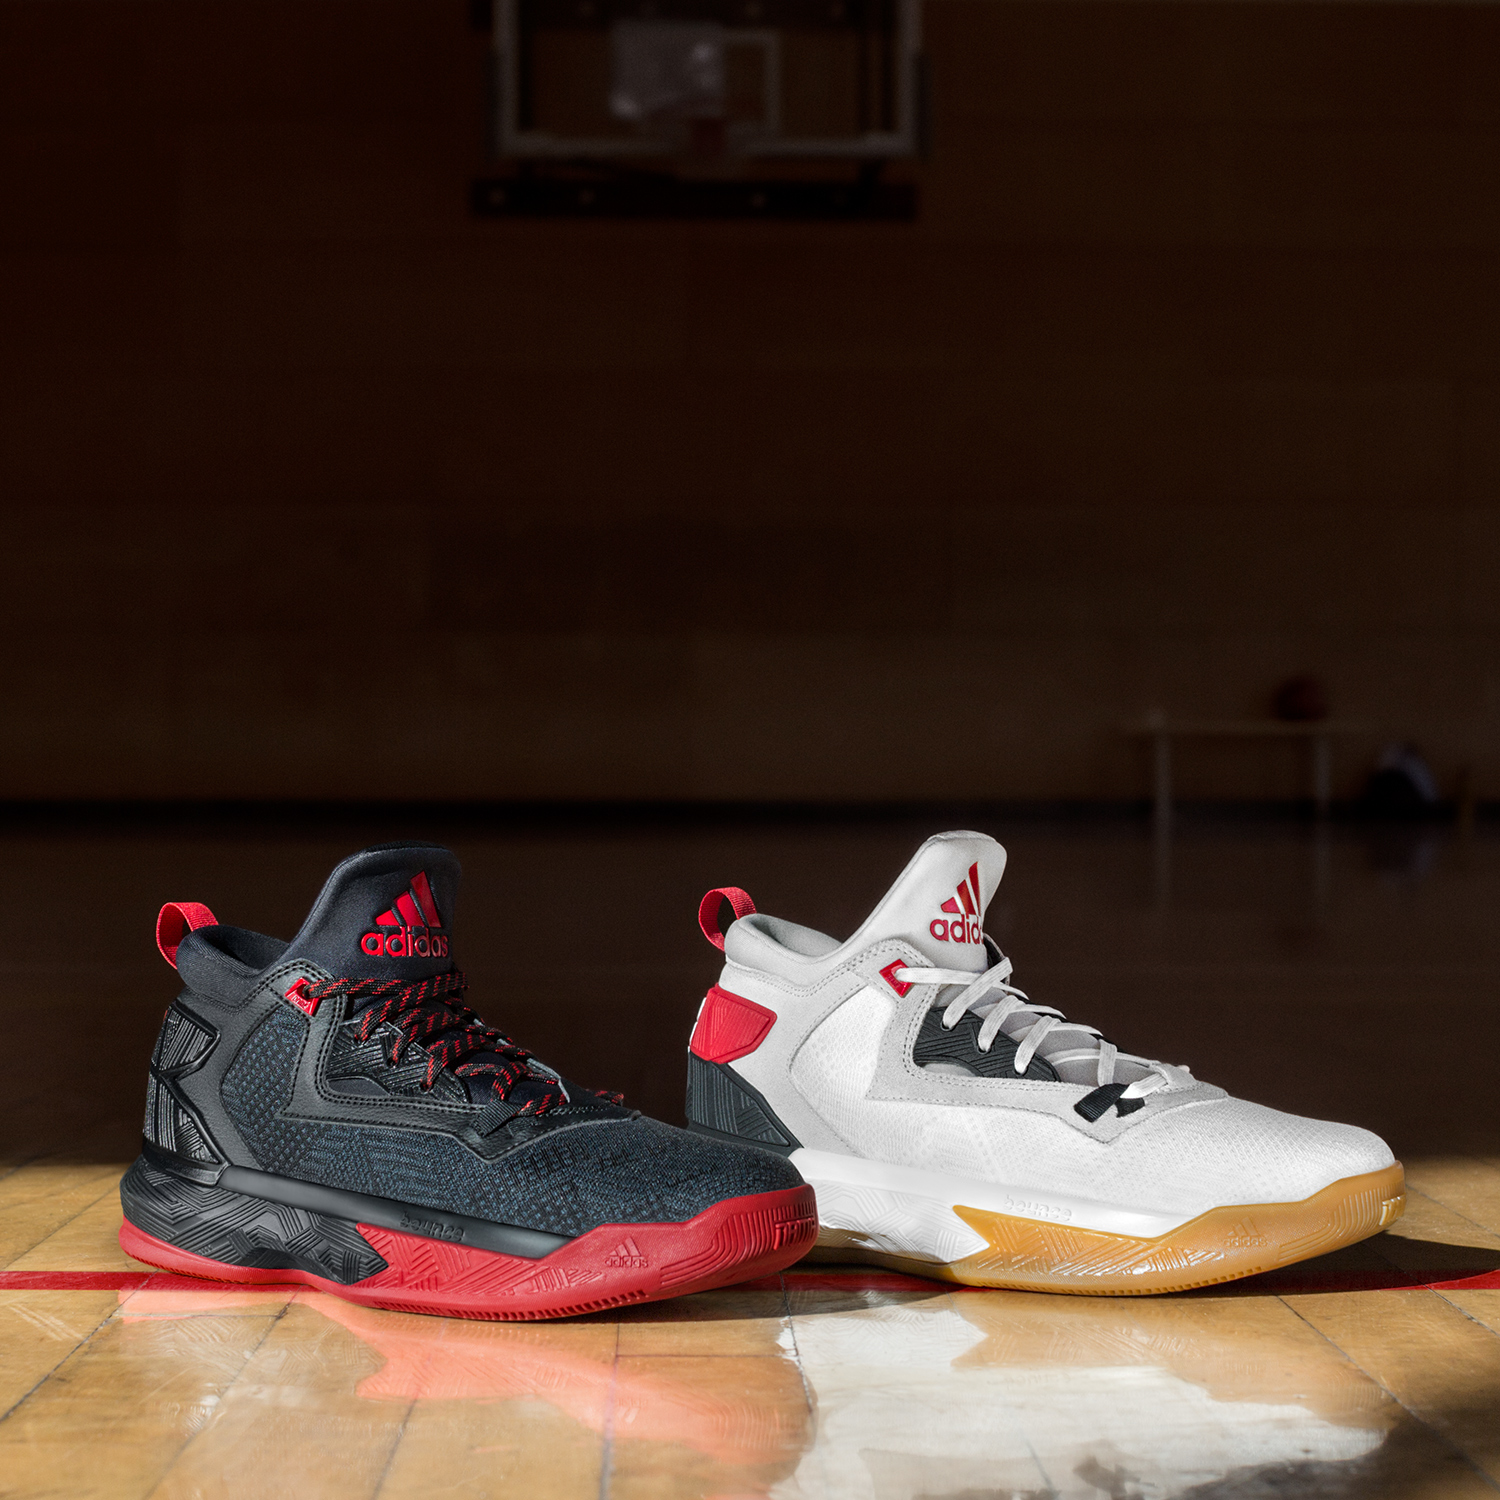 adidas and Damian Lillard officially unveil 1500 x 1500